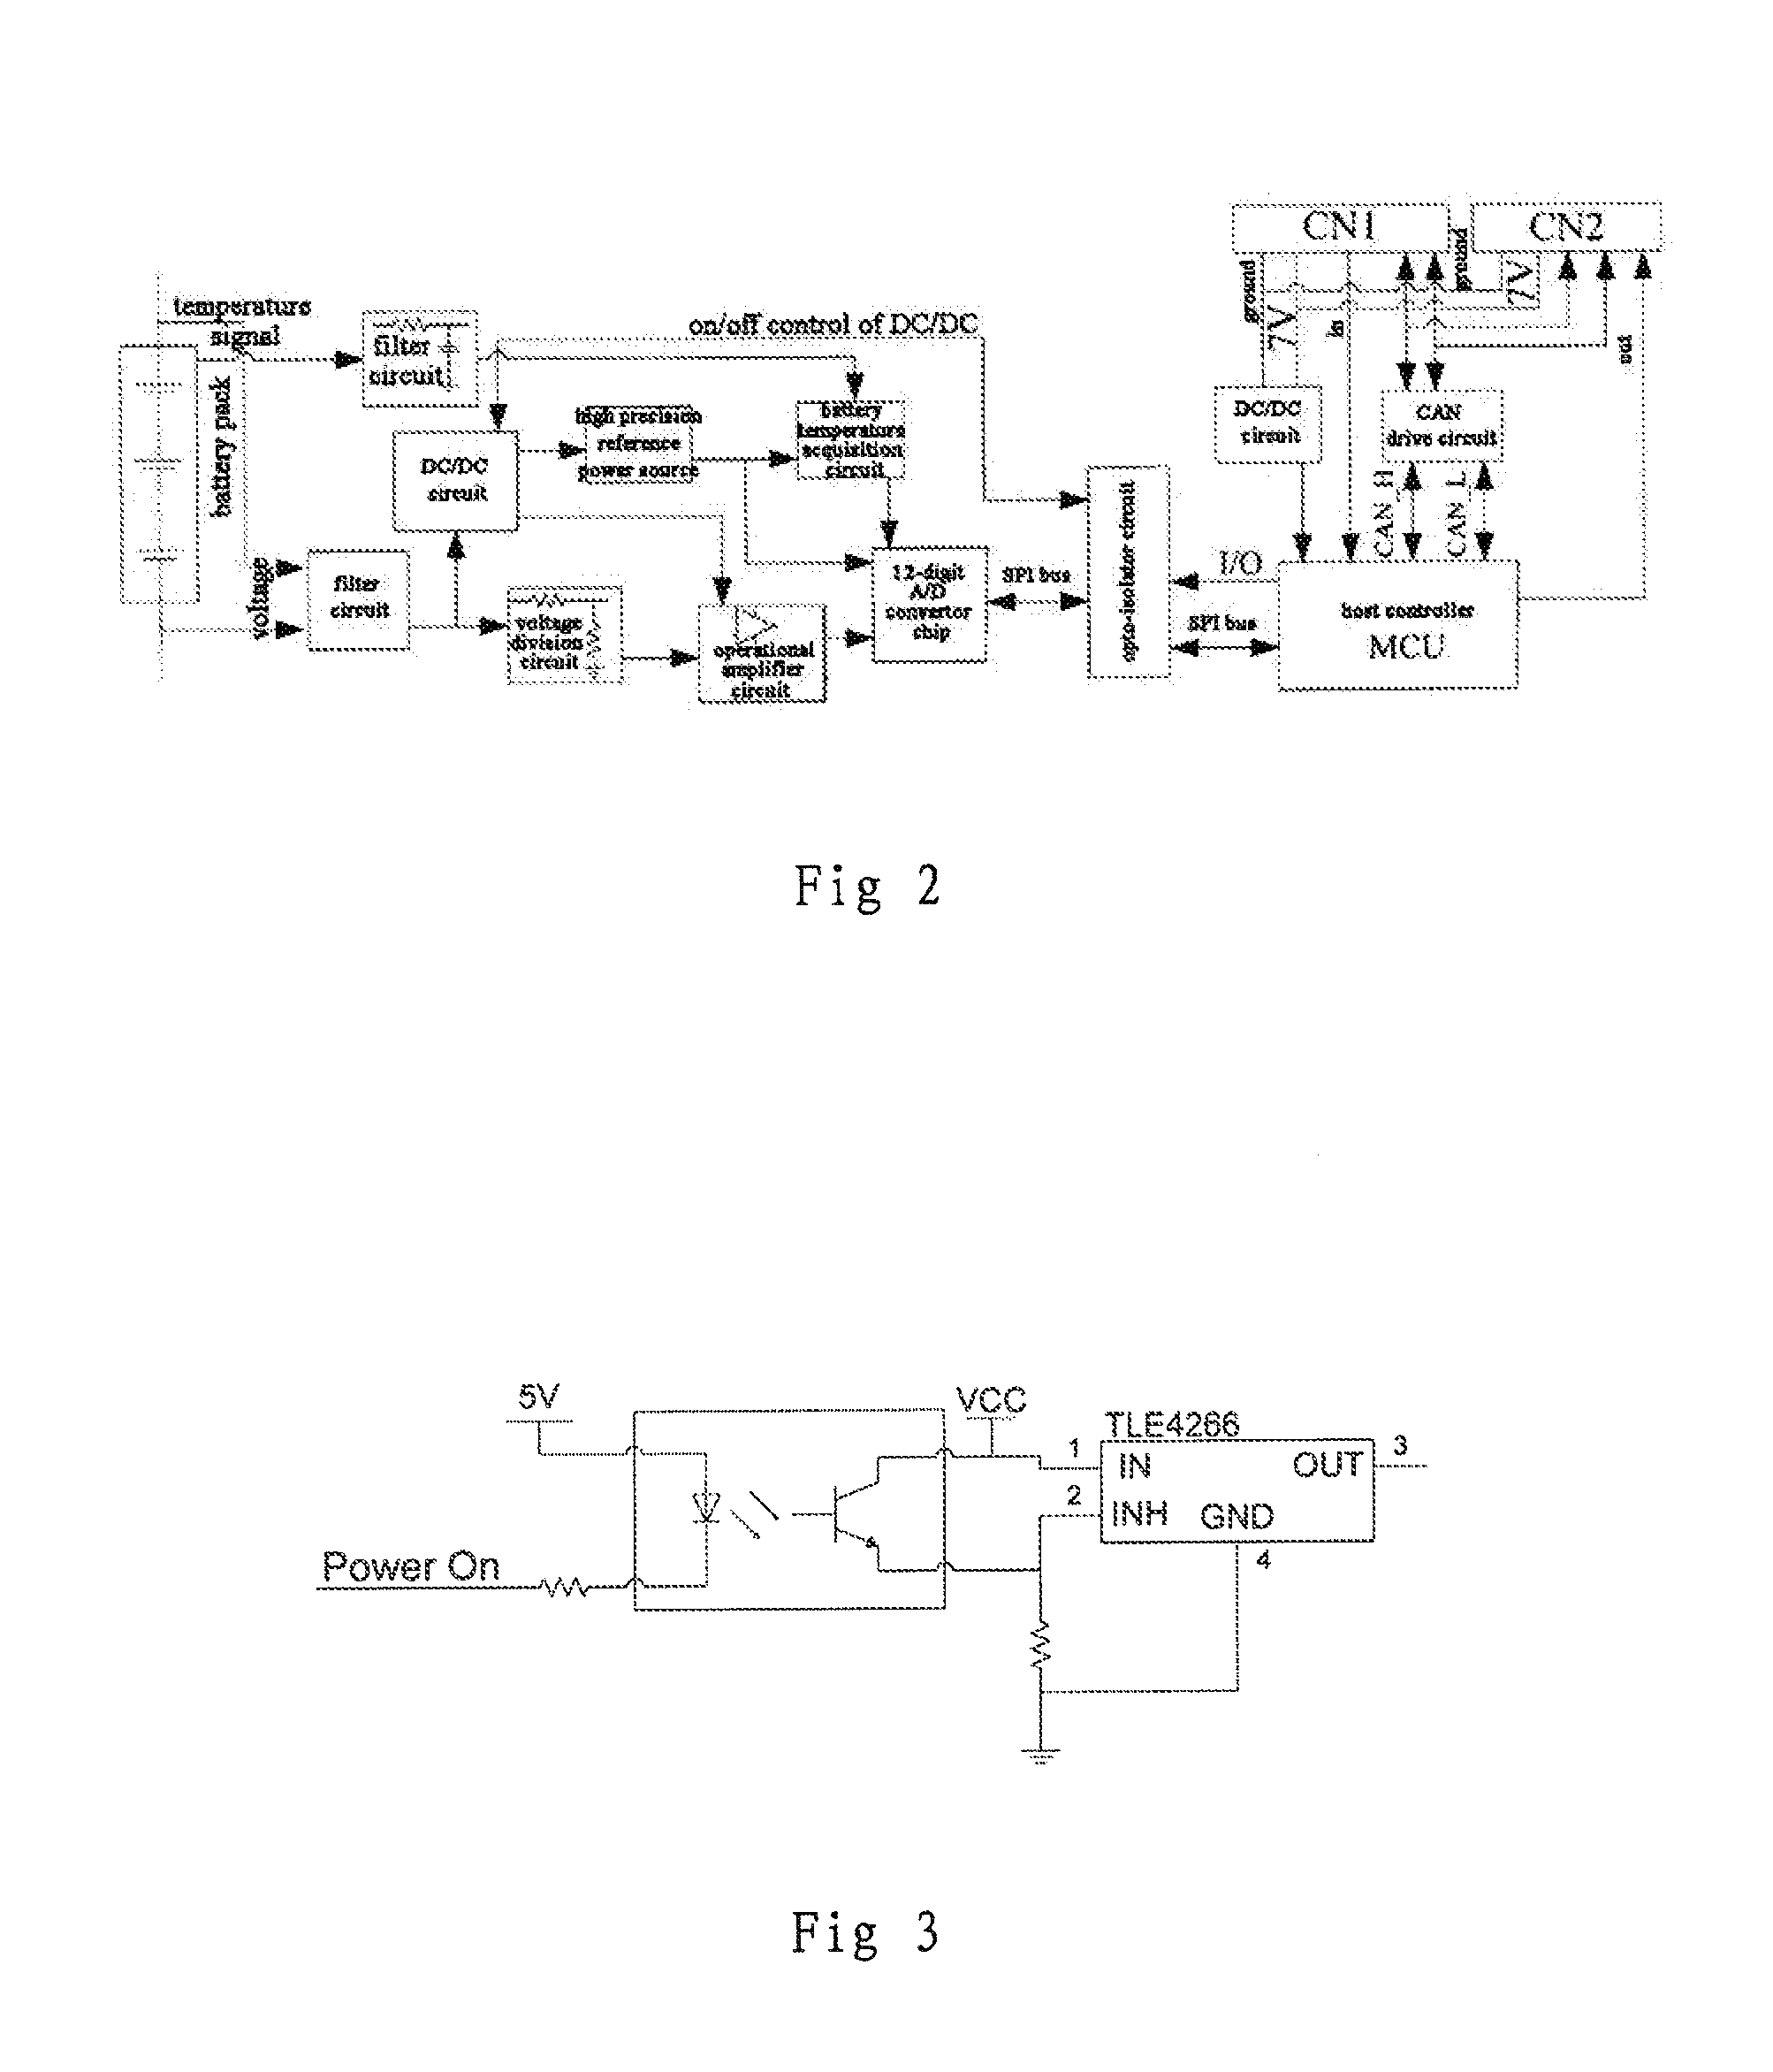 Apparatus for Monitoring Battery Voltage and Temperature